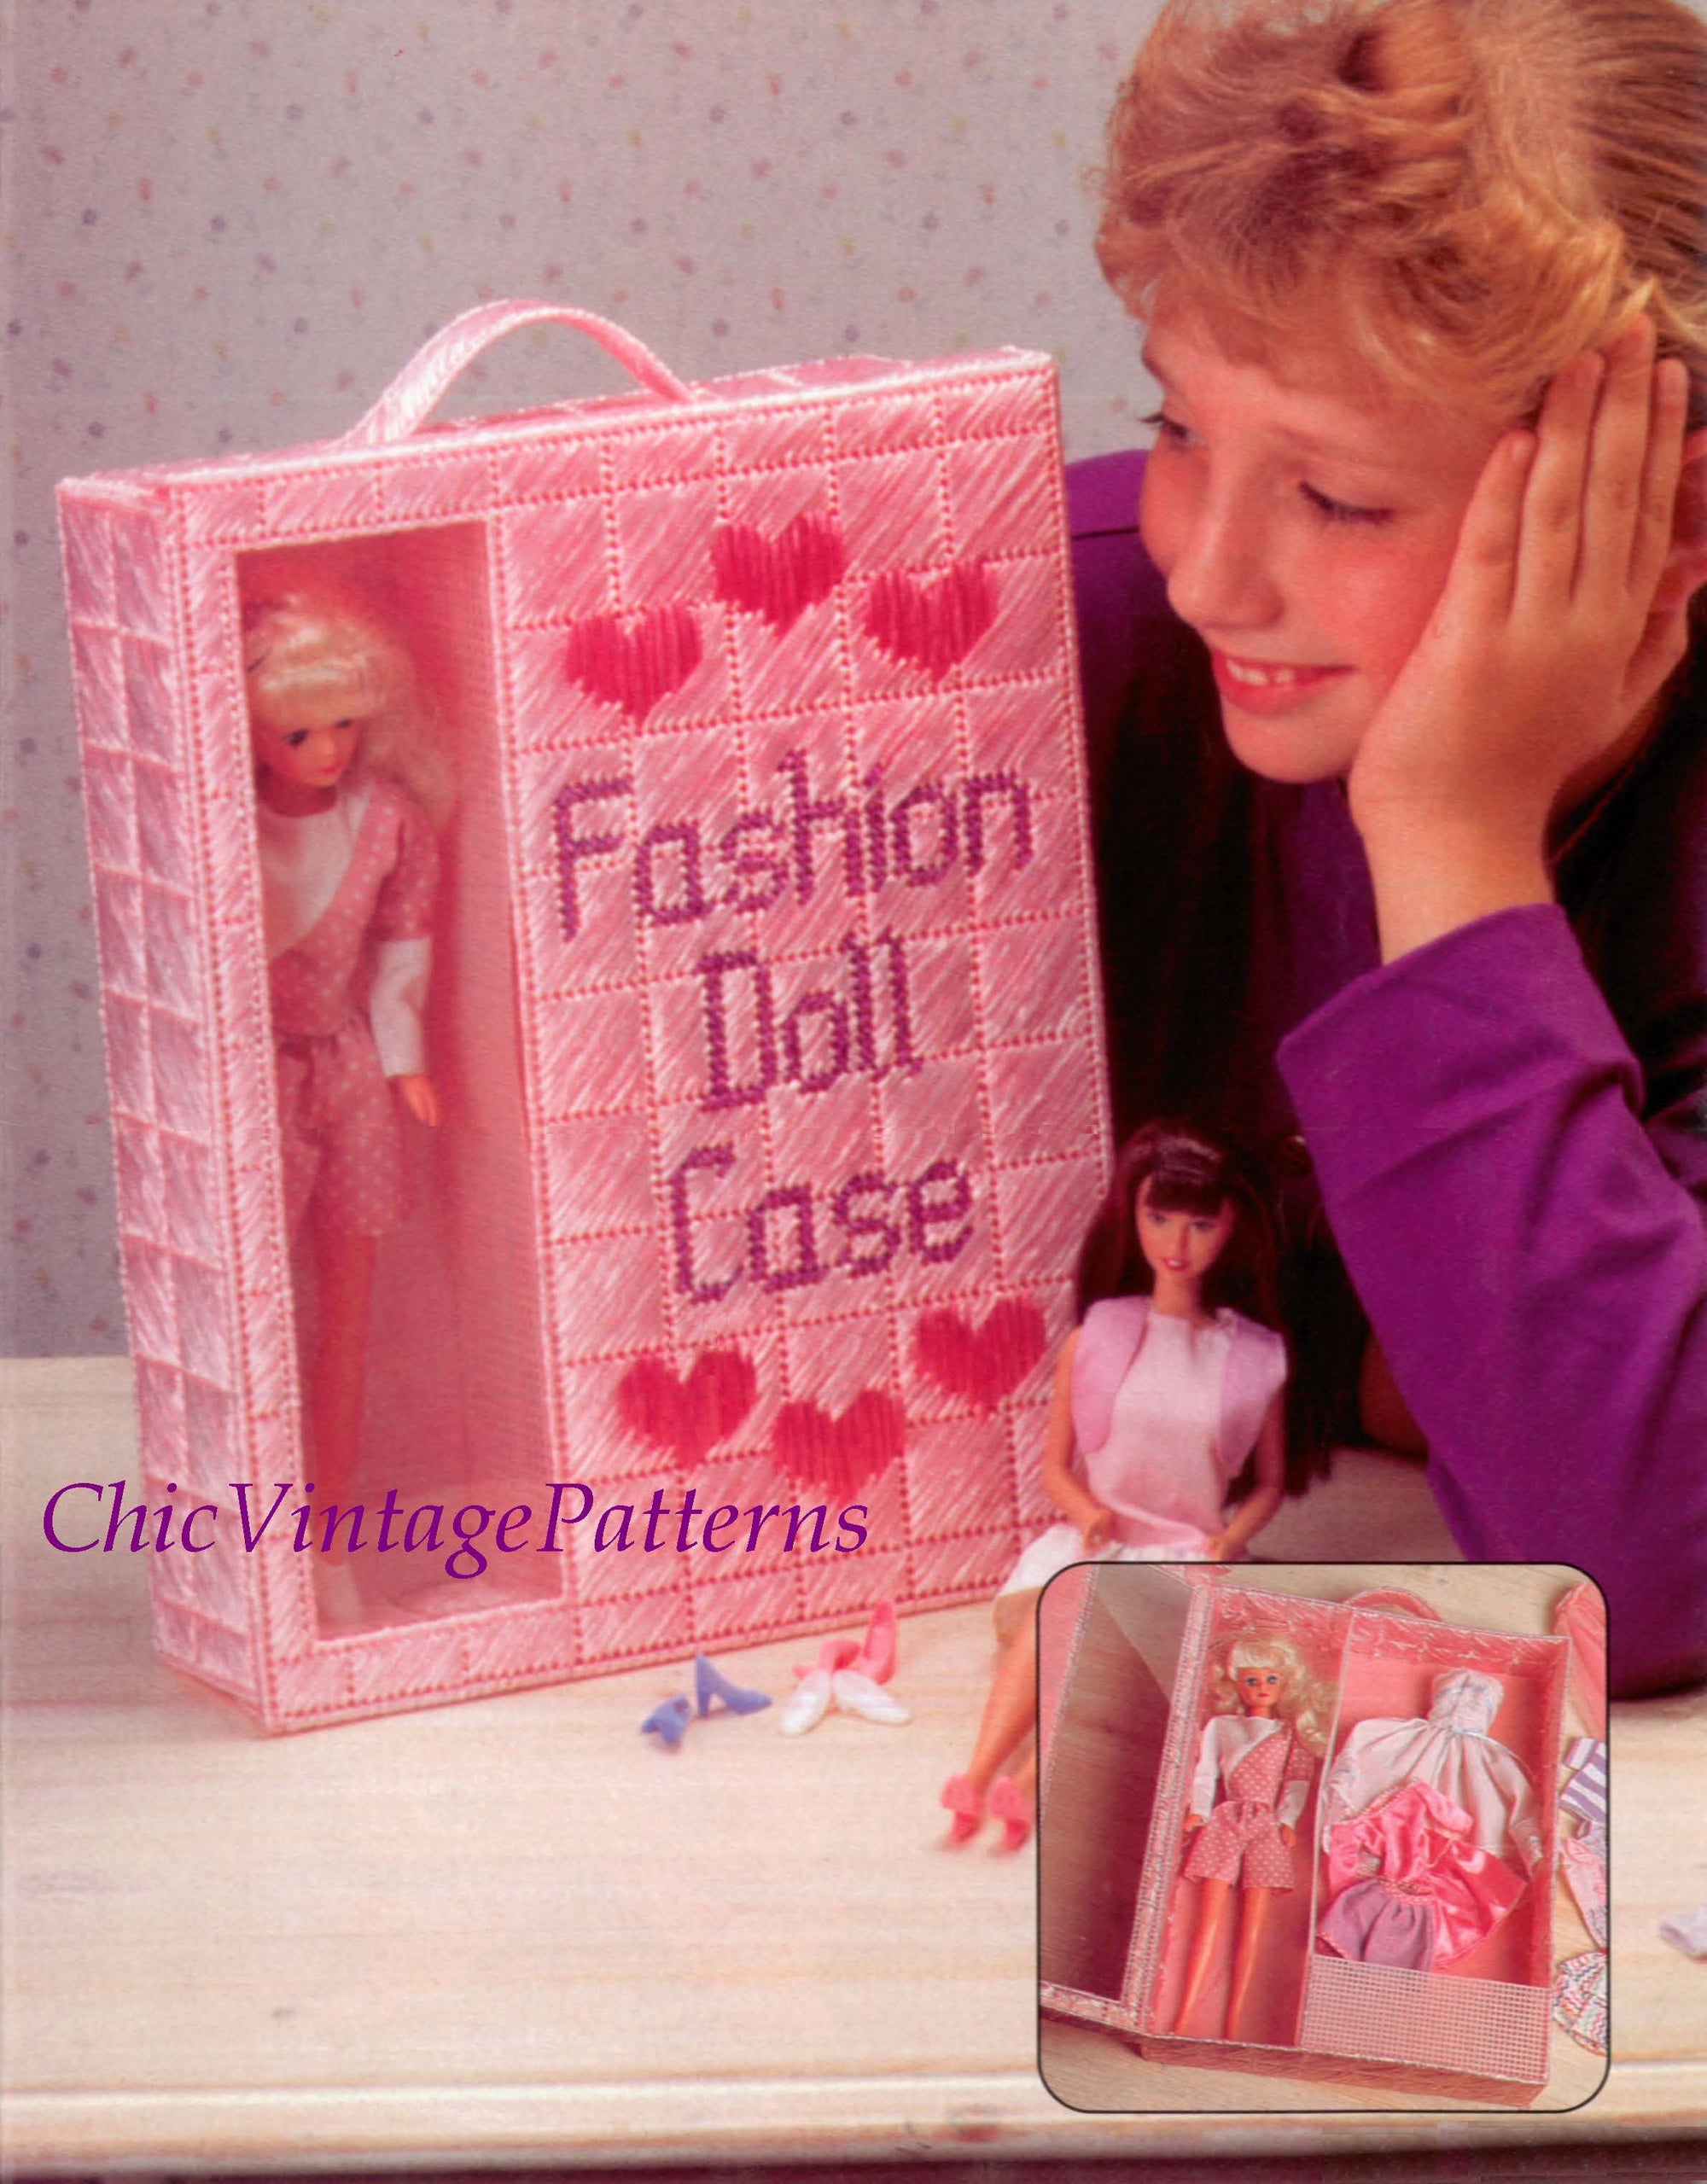 Plastic Canvas Toy and Doll Patterns